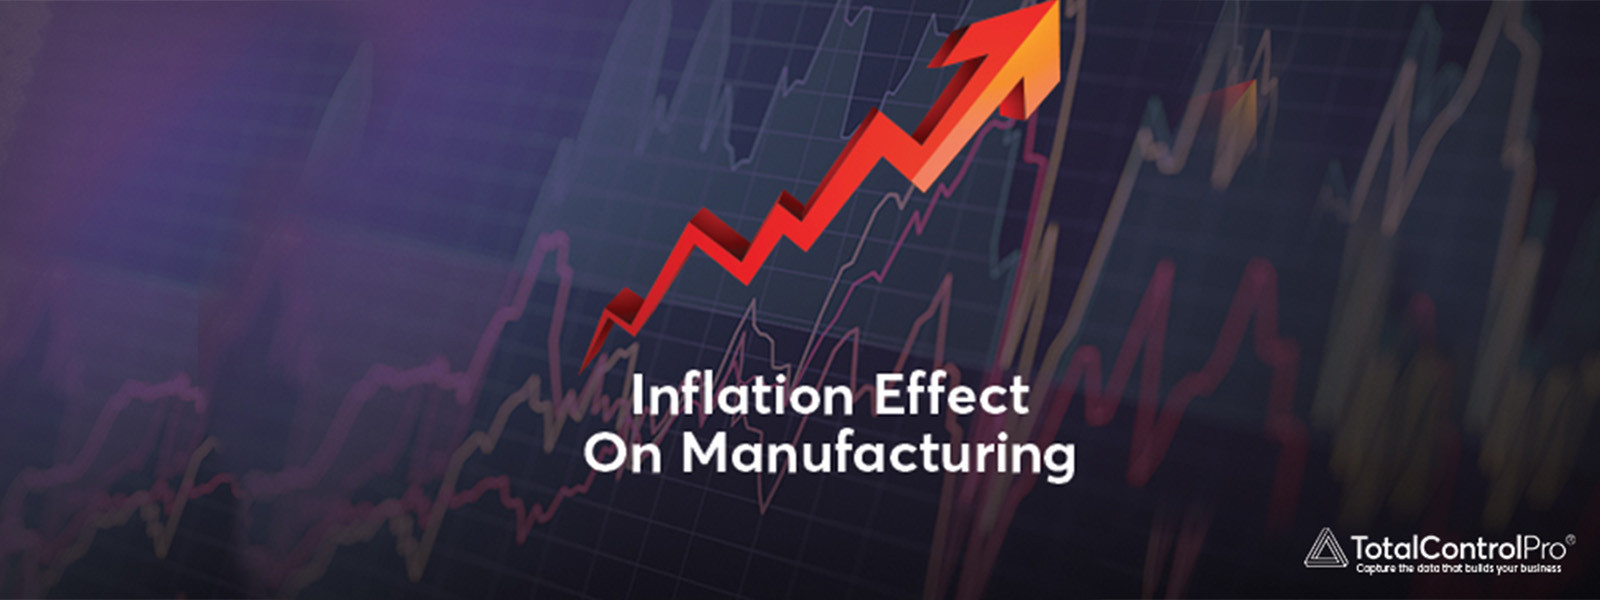 Inflation Effect On Manufacturing